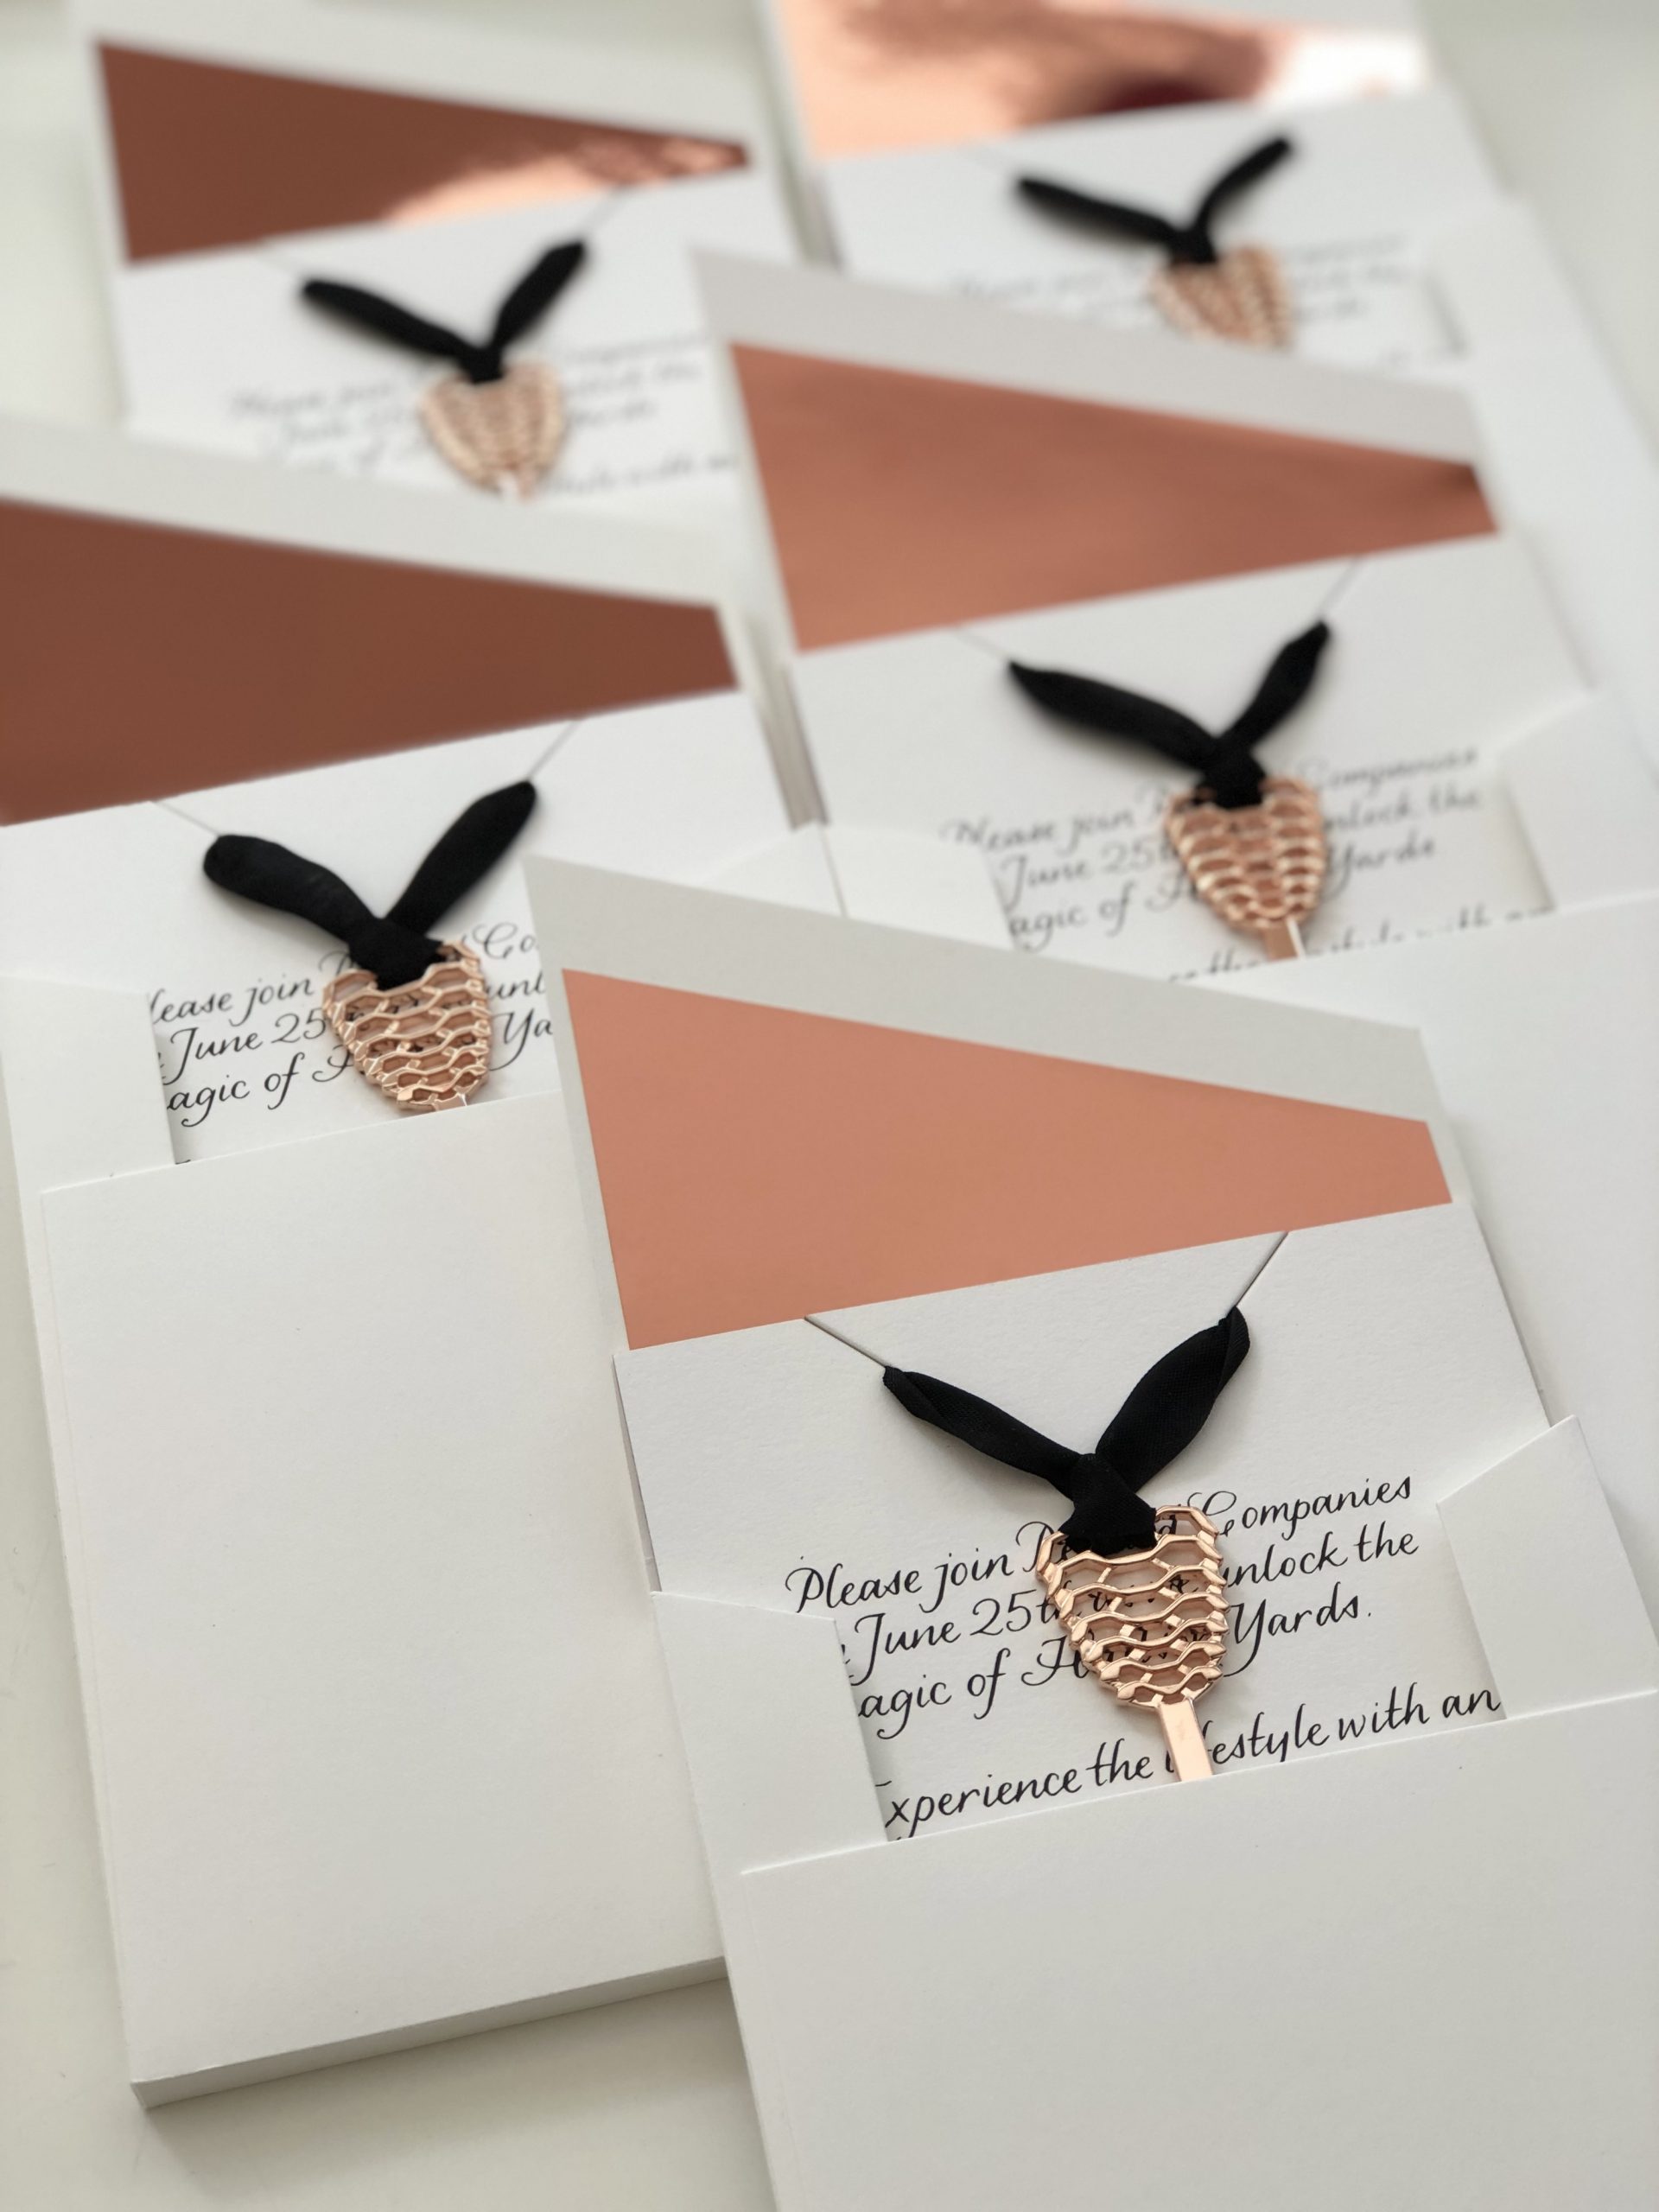 Hudson Yards Invitations with intricate details, designed by Christine Traulich and the RedBliss Design team. 